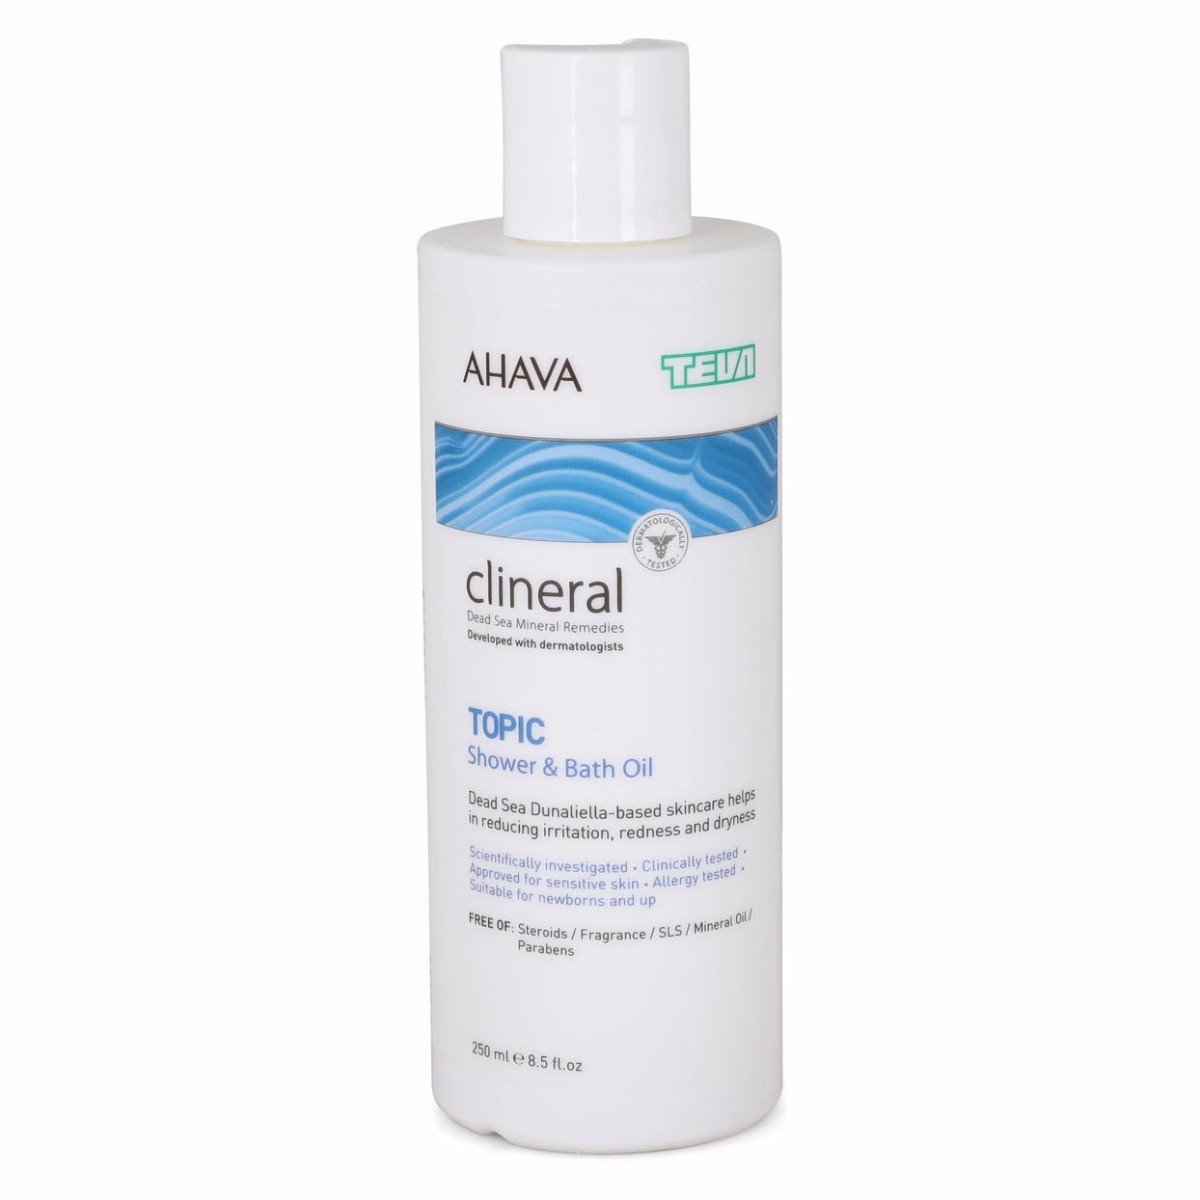 AHAVA and Teva Clineral TOPIC Shower and Bath Oil - 1